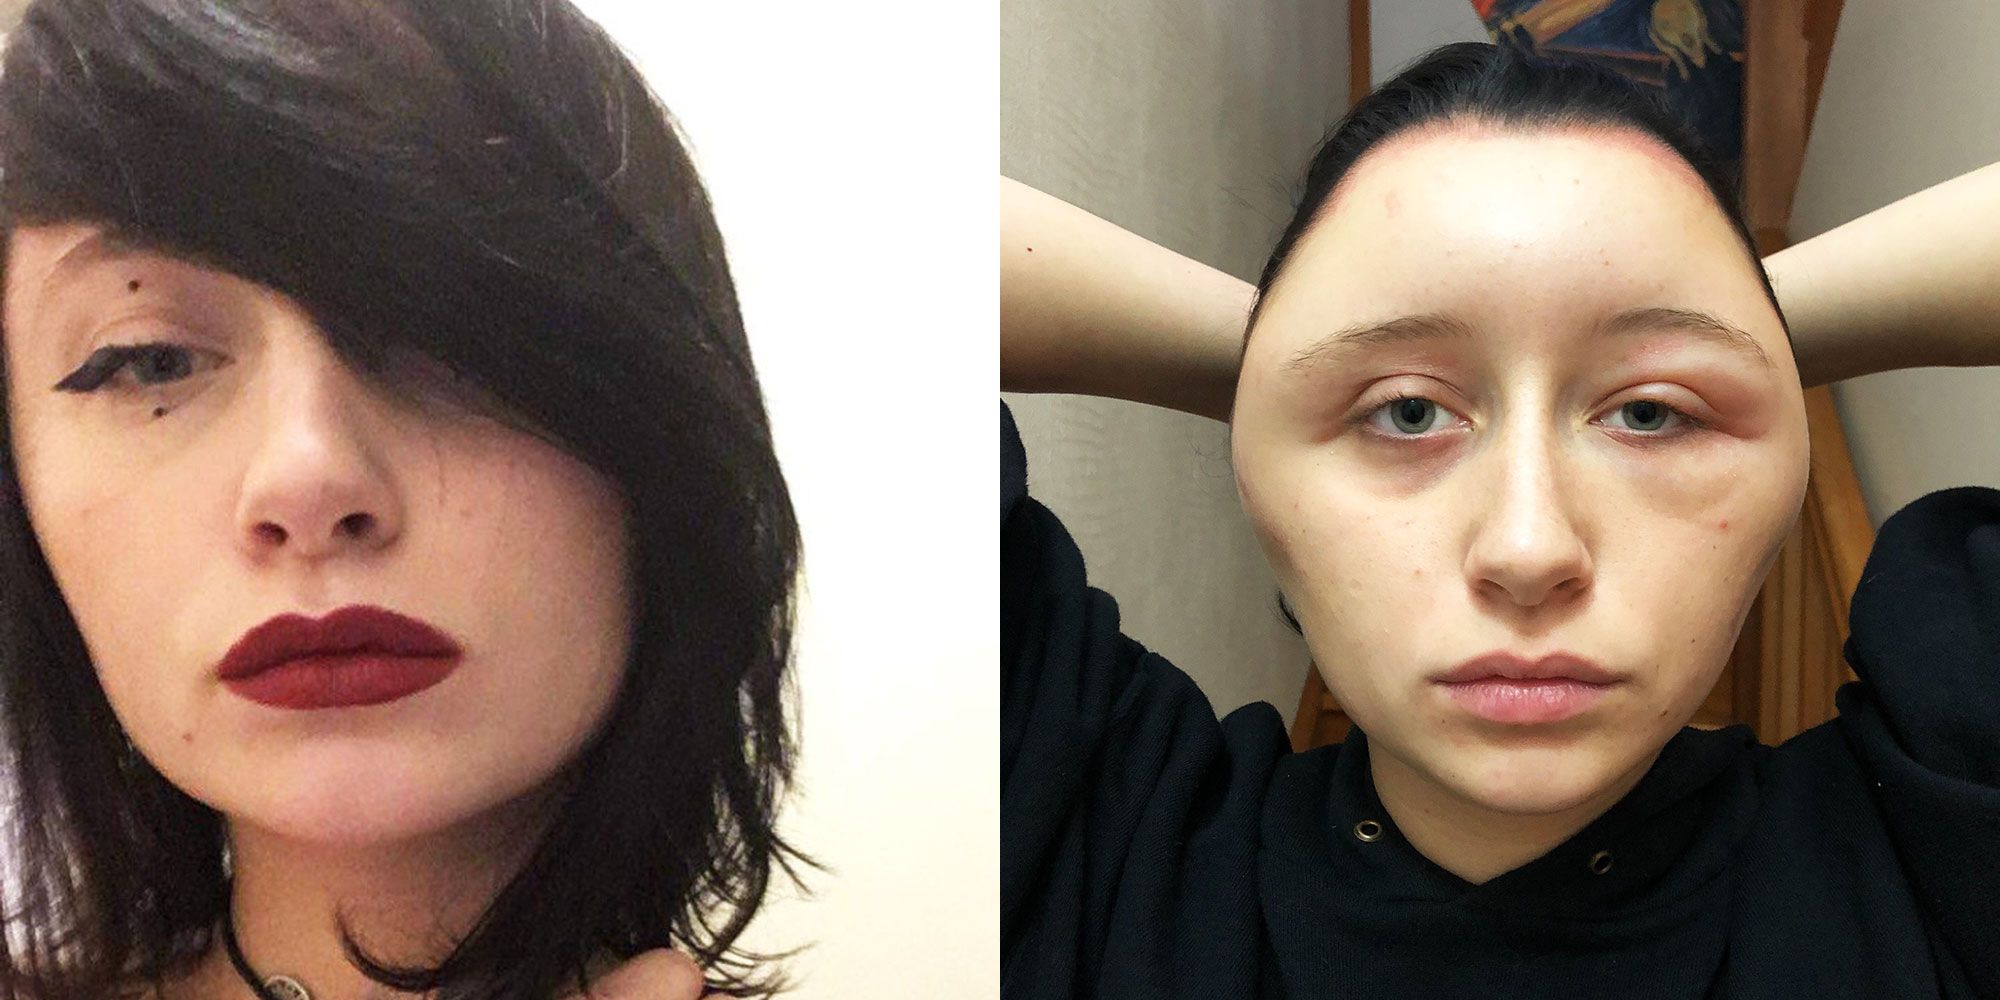 Woman Had Severely Swollen Head After Allergic Reaction To Hair